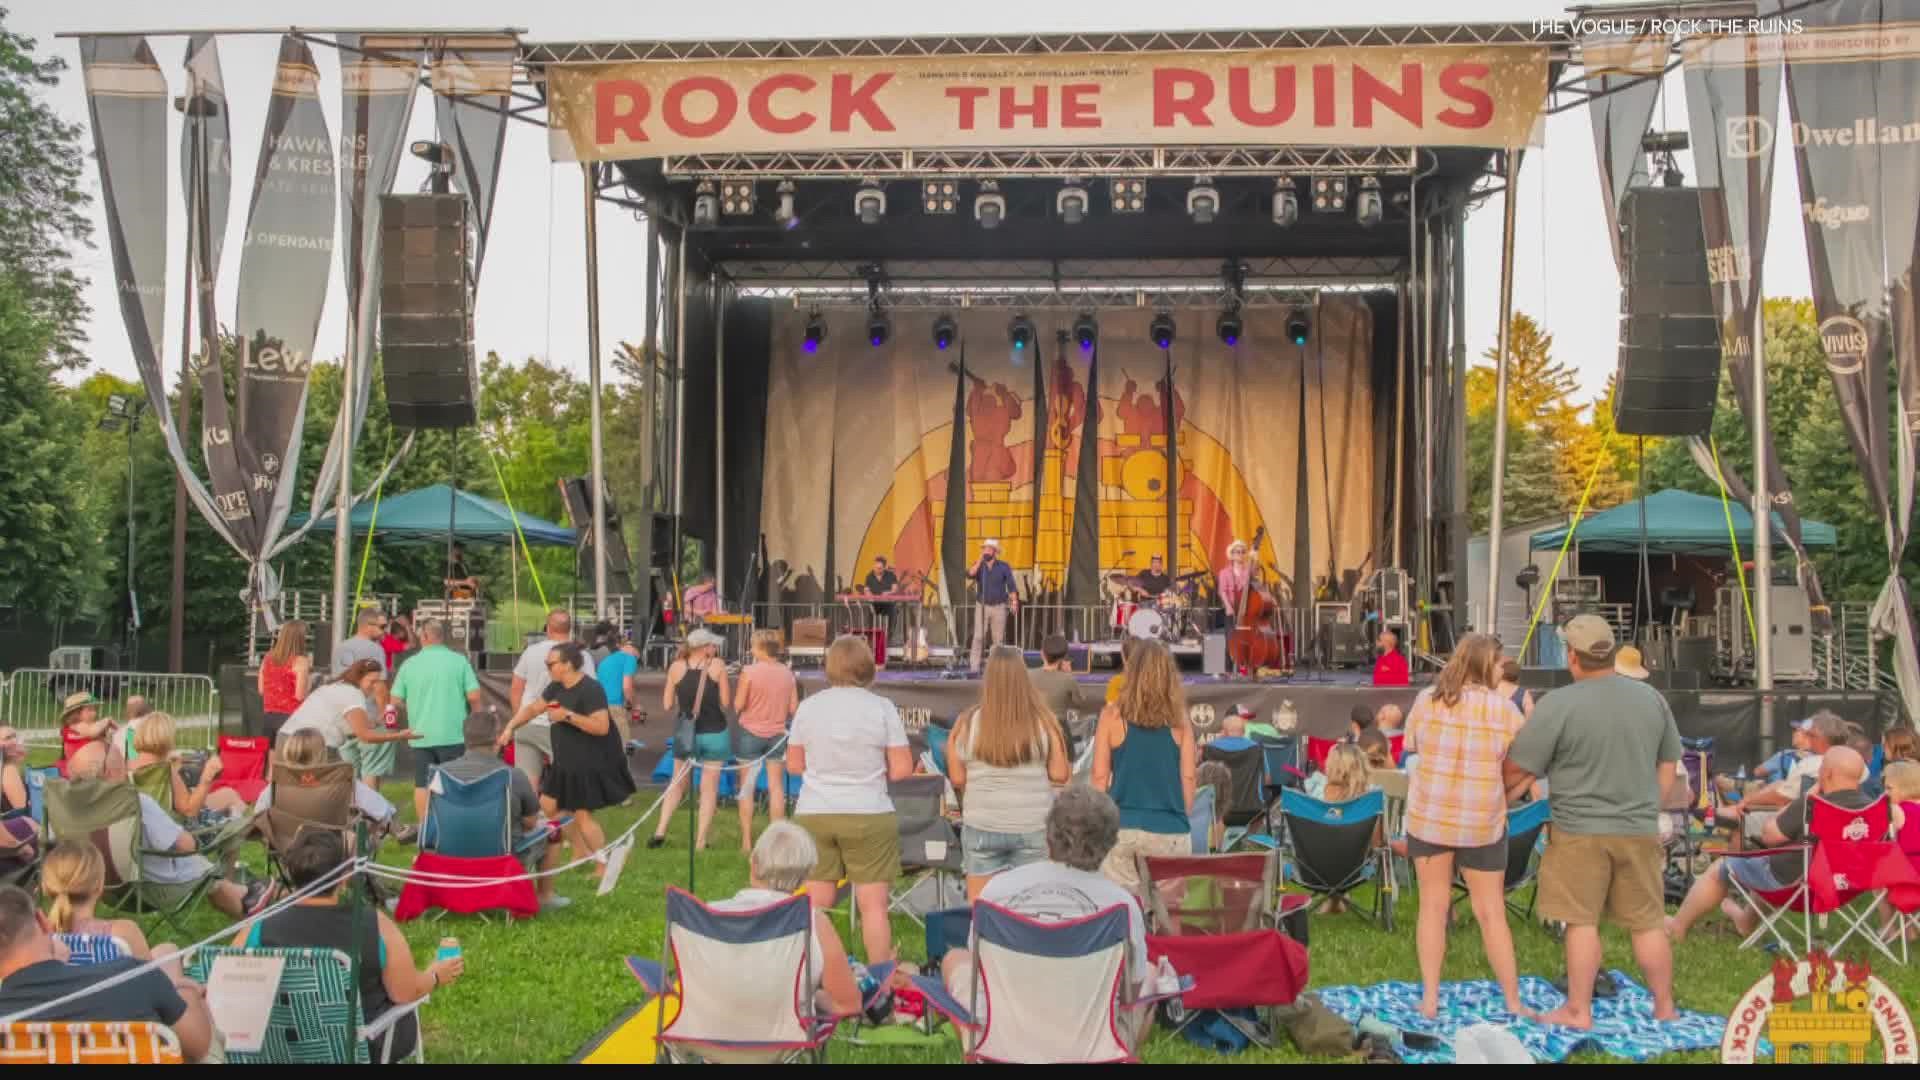 Rock the Ruins summer concert series returns to Holliday Park